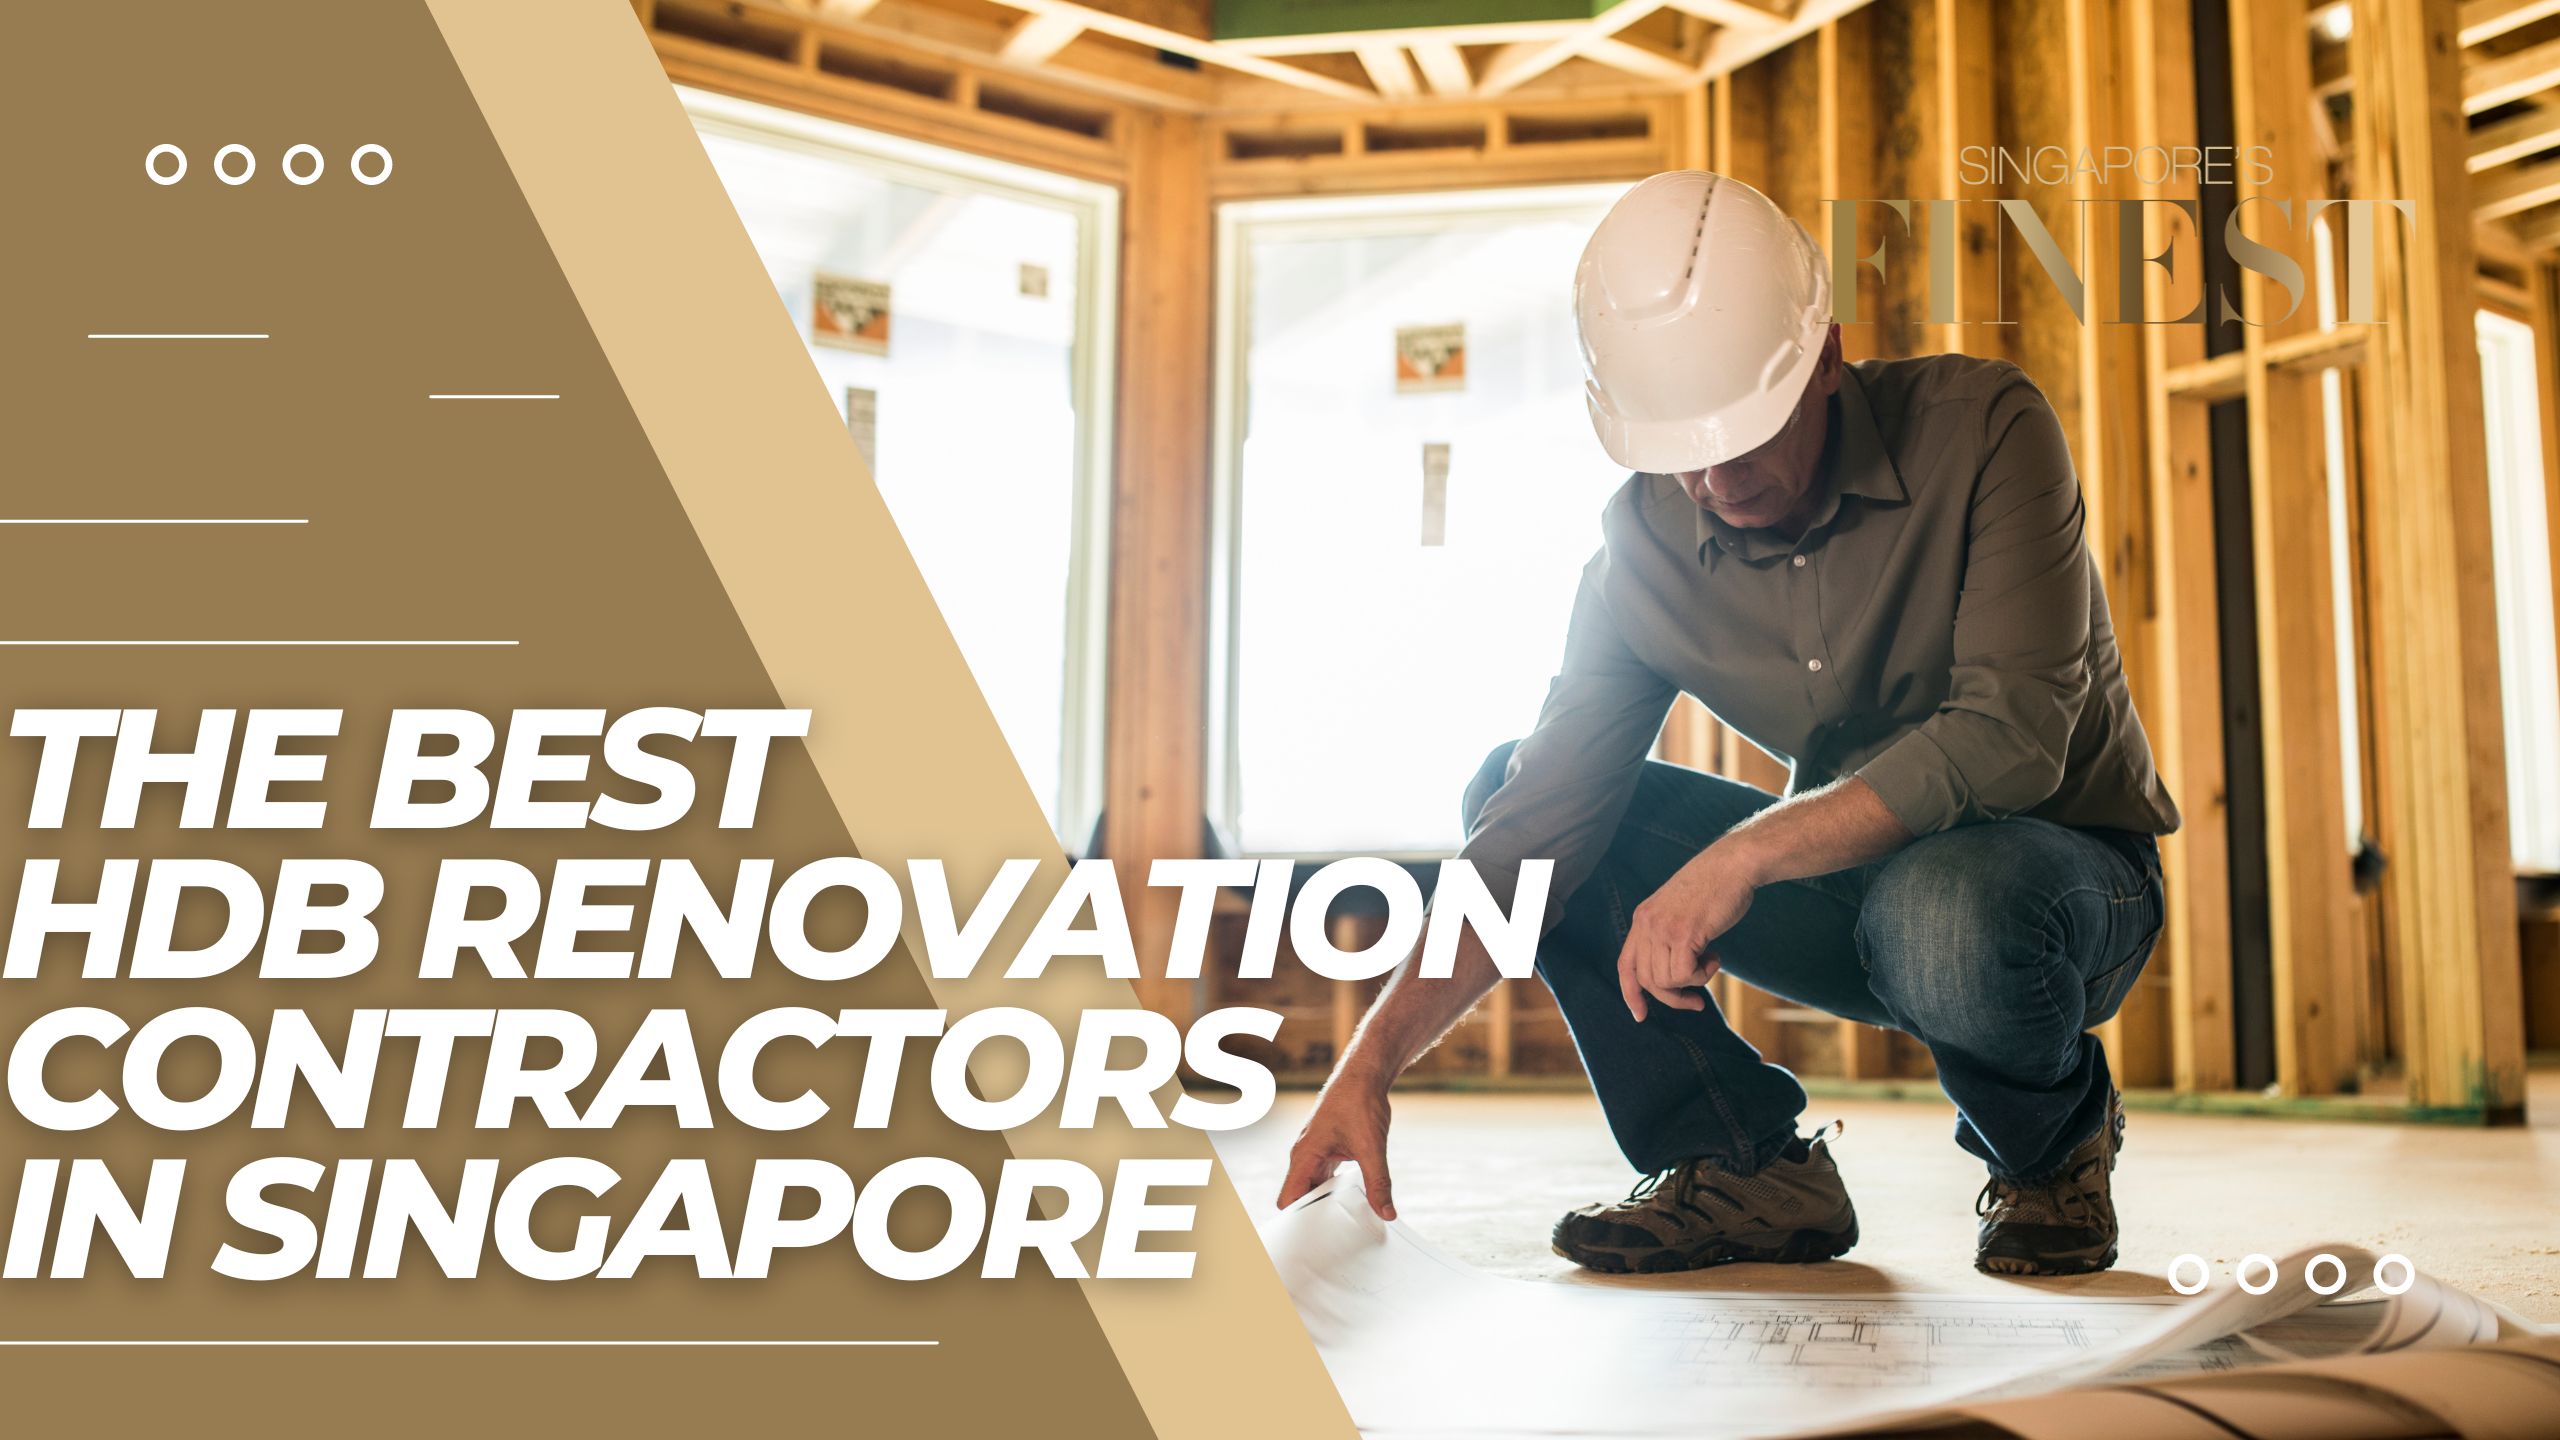 The Finest HDB Renovation Contractors in Singapore